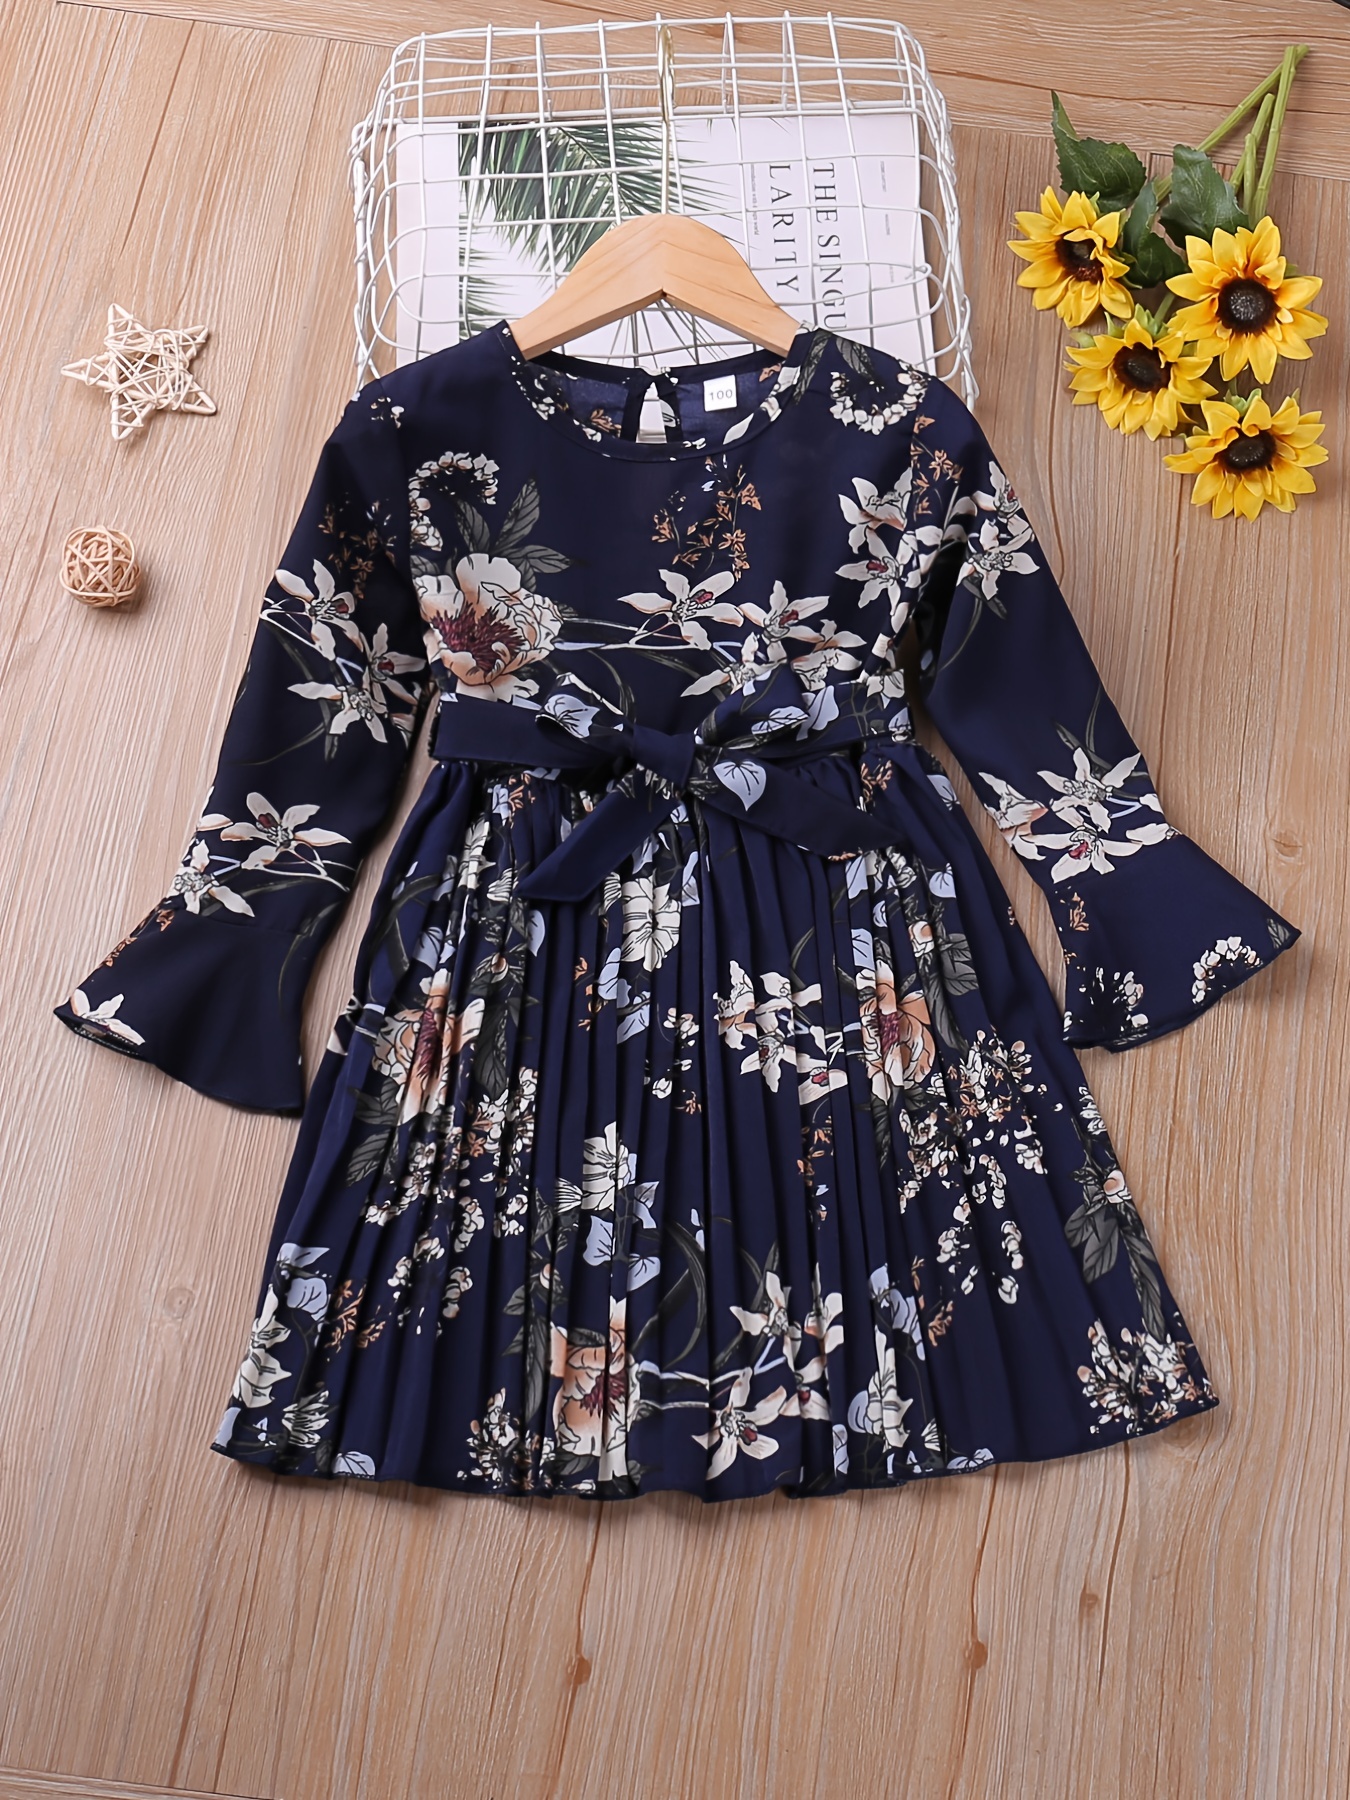 little girls boho floral flare long sleeve casual pleated dress for party going out kids spring fall clothes details 5